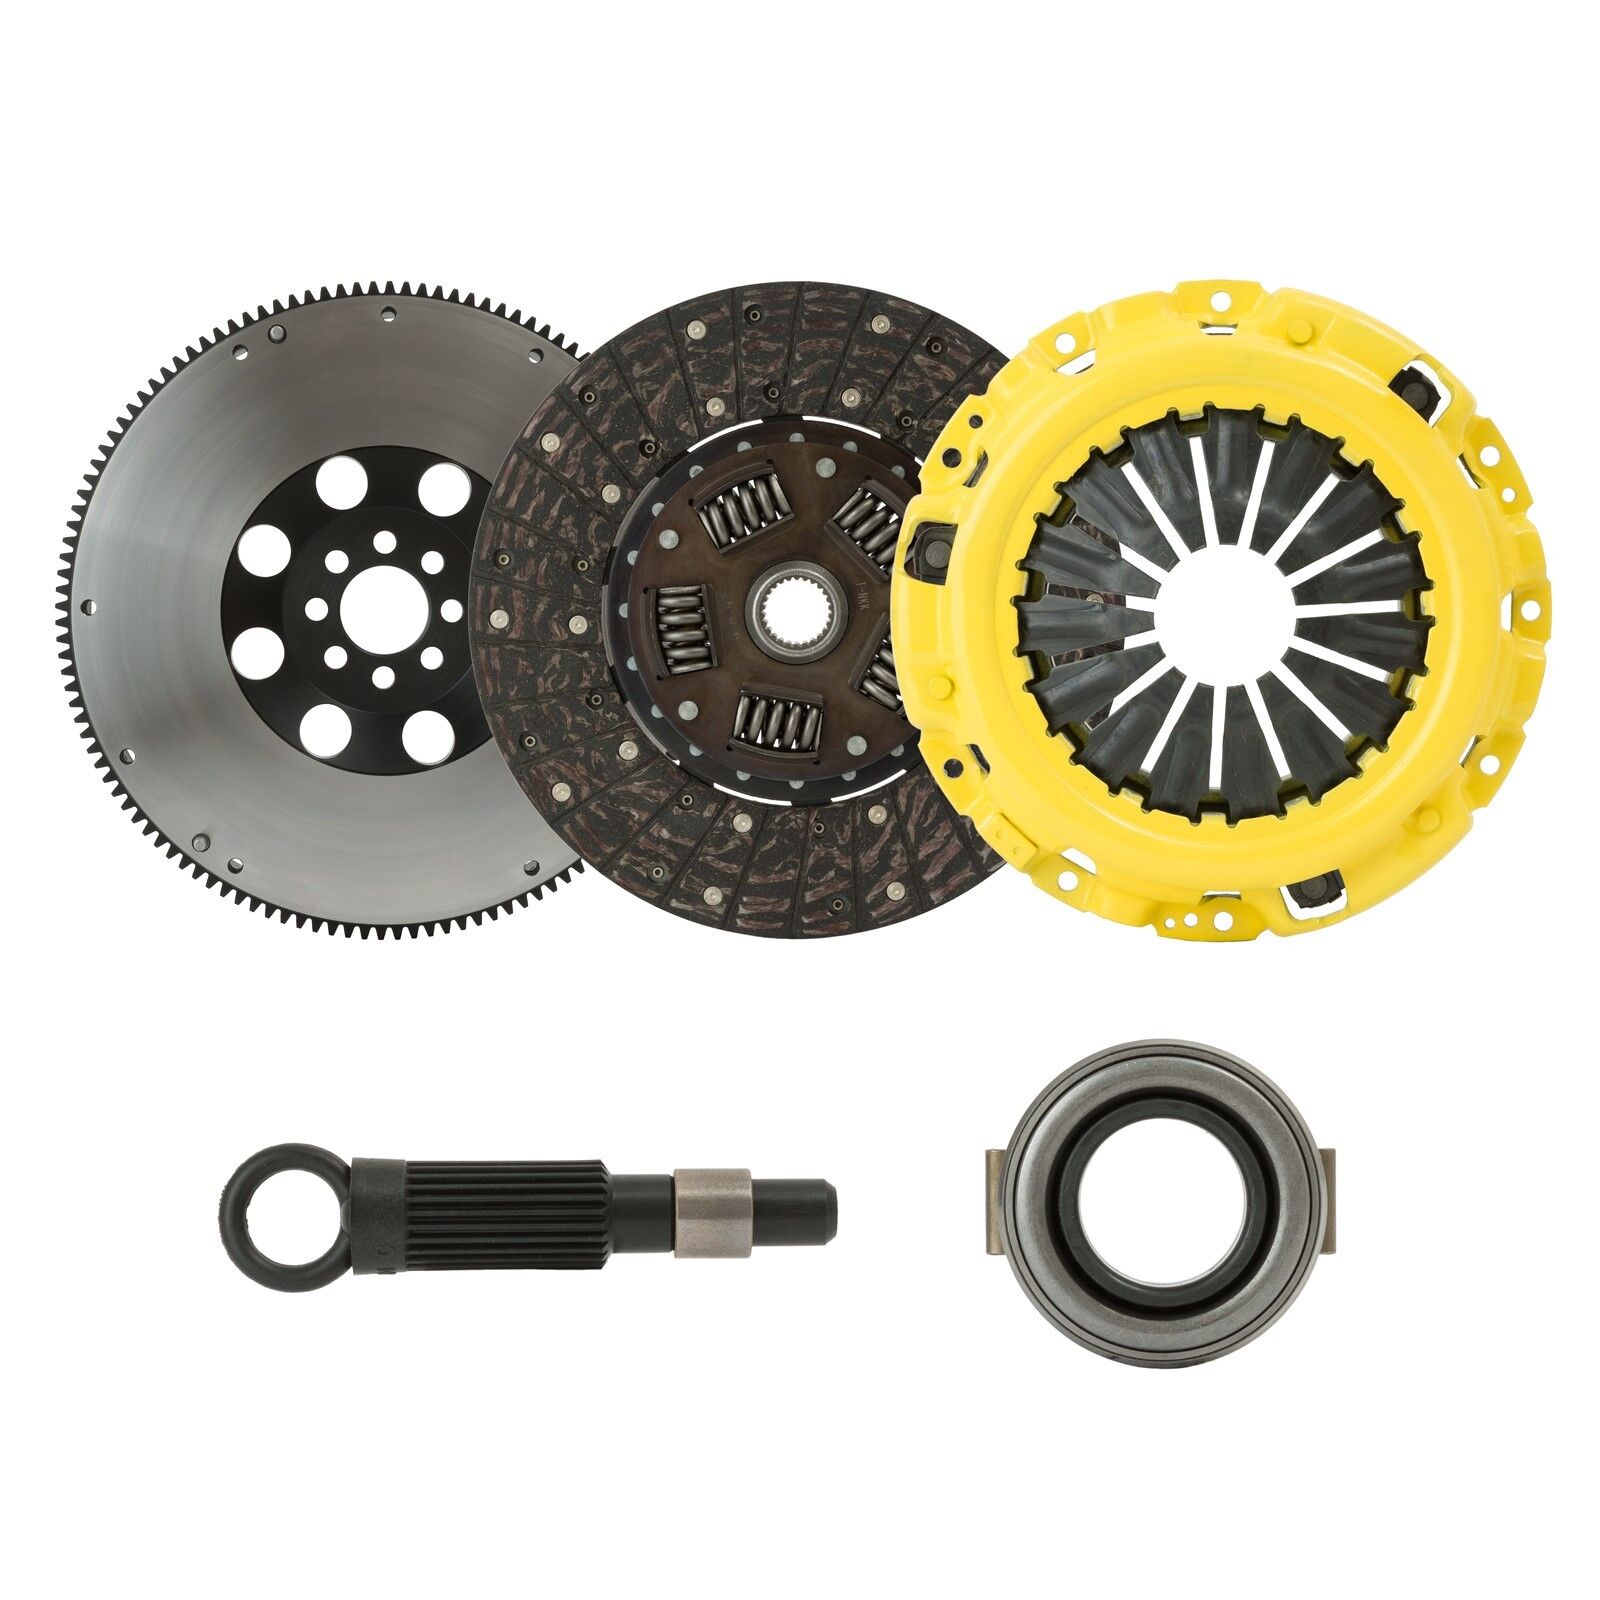 CLUTCHXPERTS STAGE 2 RACE CLUTCH+FLYWHEEL fits 92-93 ACURA INTEGRA GS MODEL